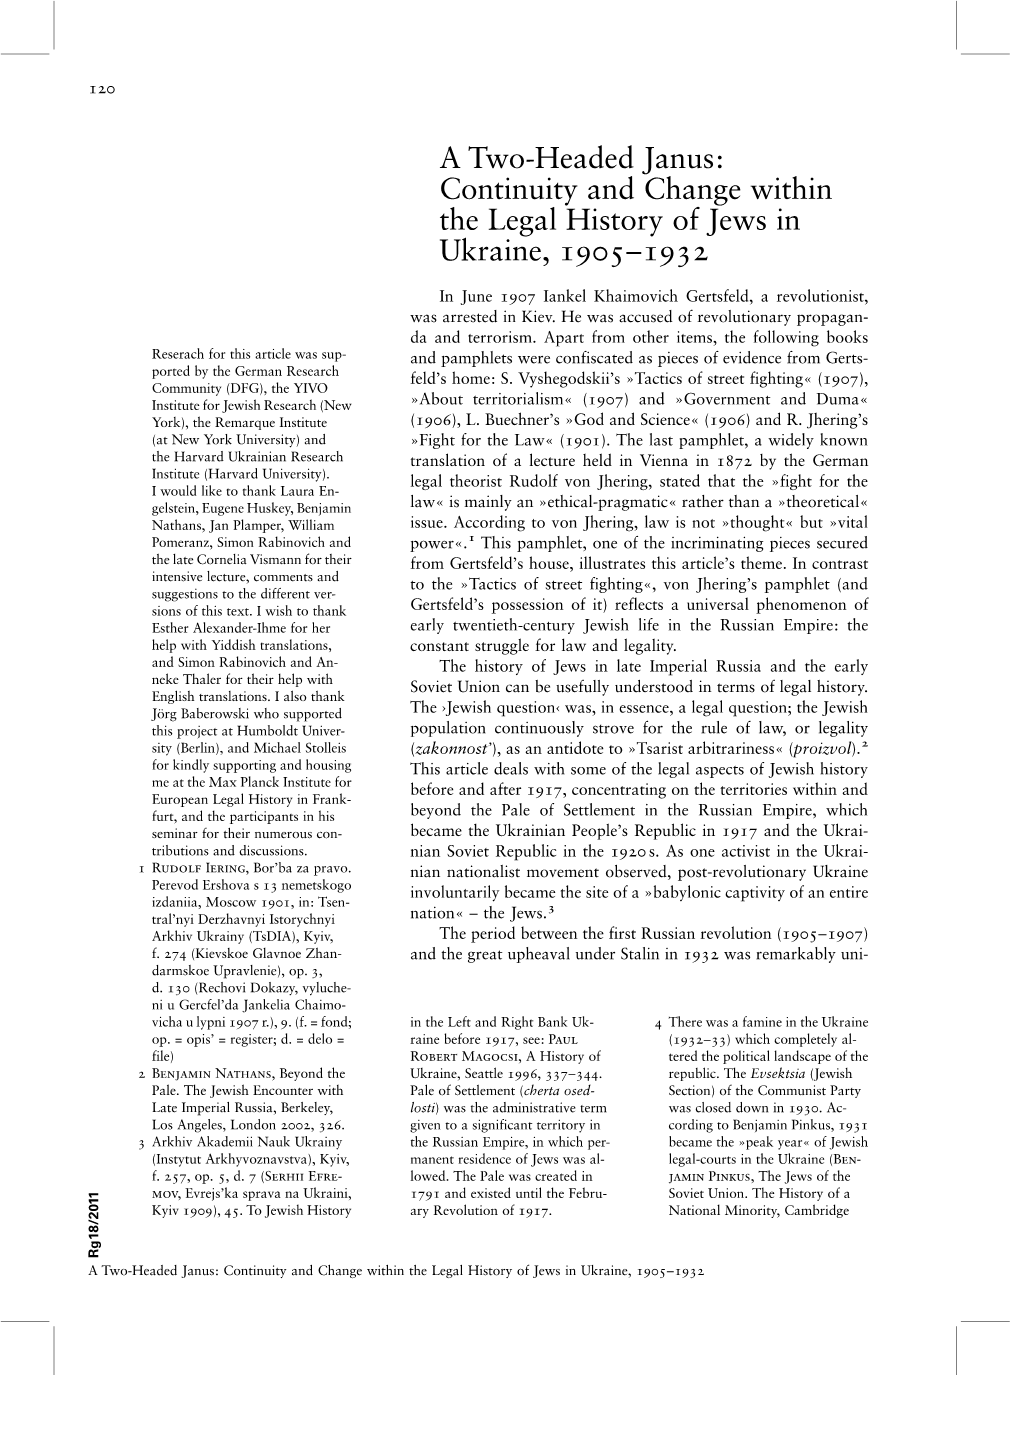 A Two-Headed Janus: Continuity and Change Within the Legal History of Jews in Ukraine, 1905–1932